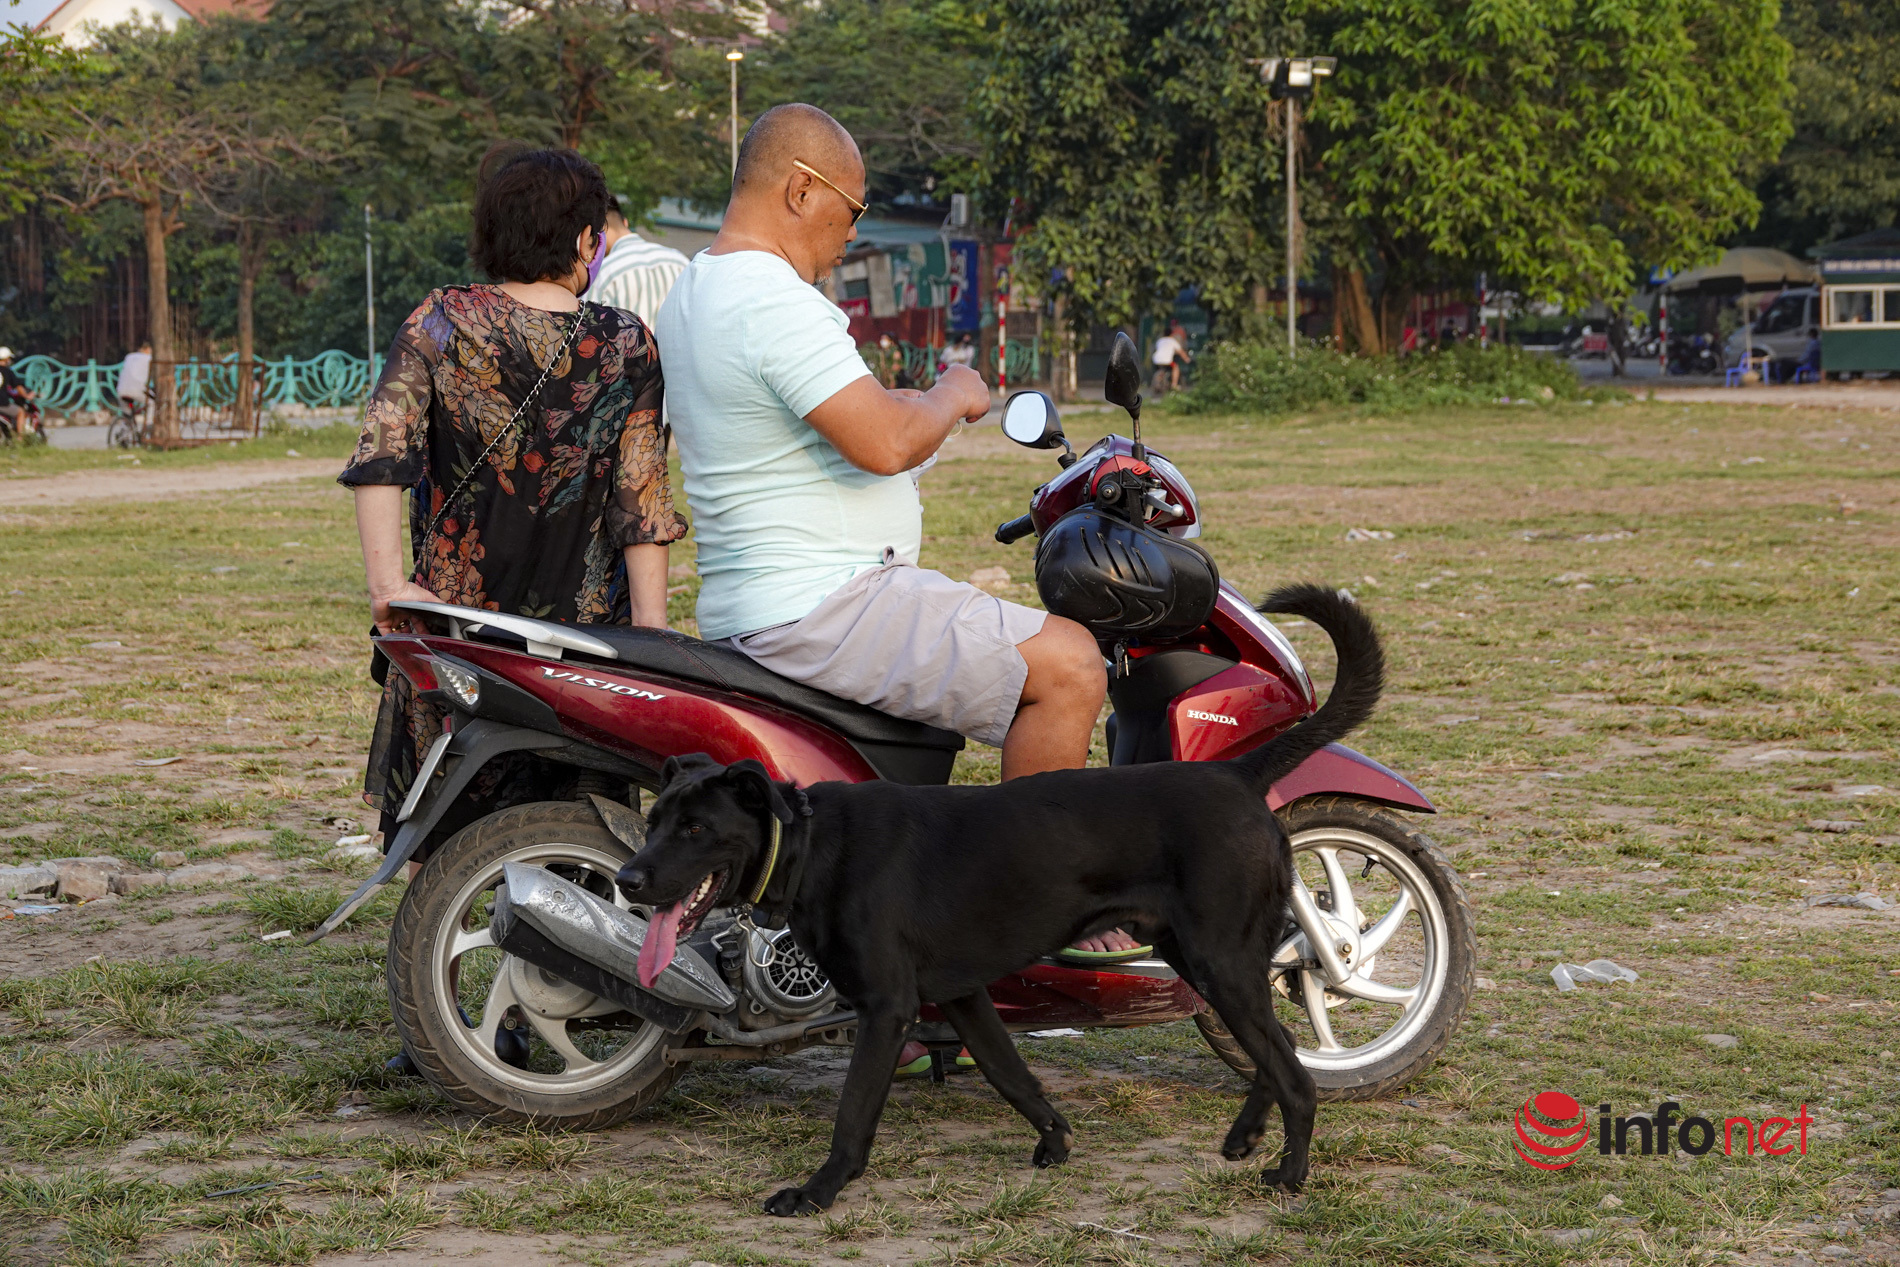 Hanoi: Dogs without leashes and muzzles still run in public places, ignoring orders to let them loose